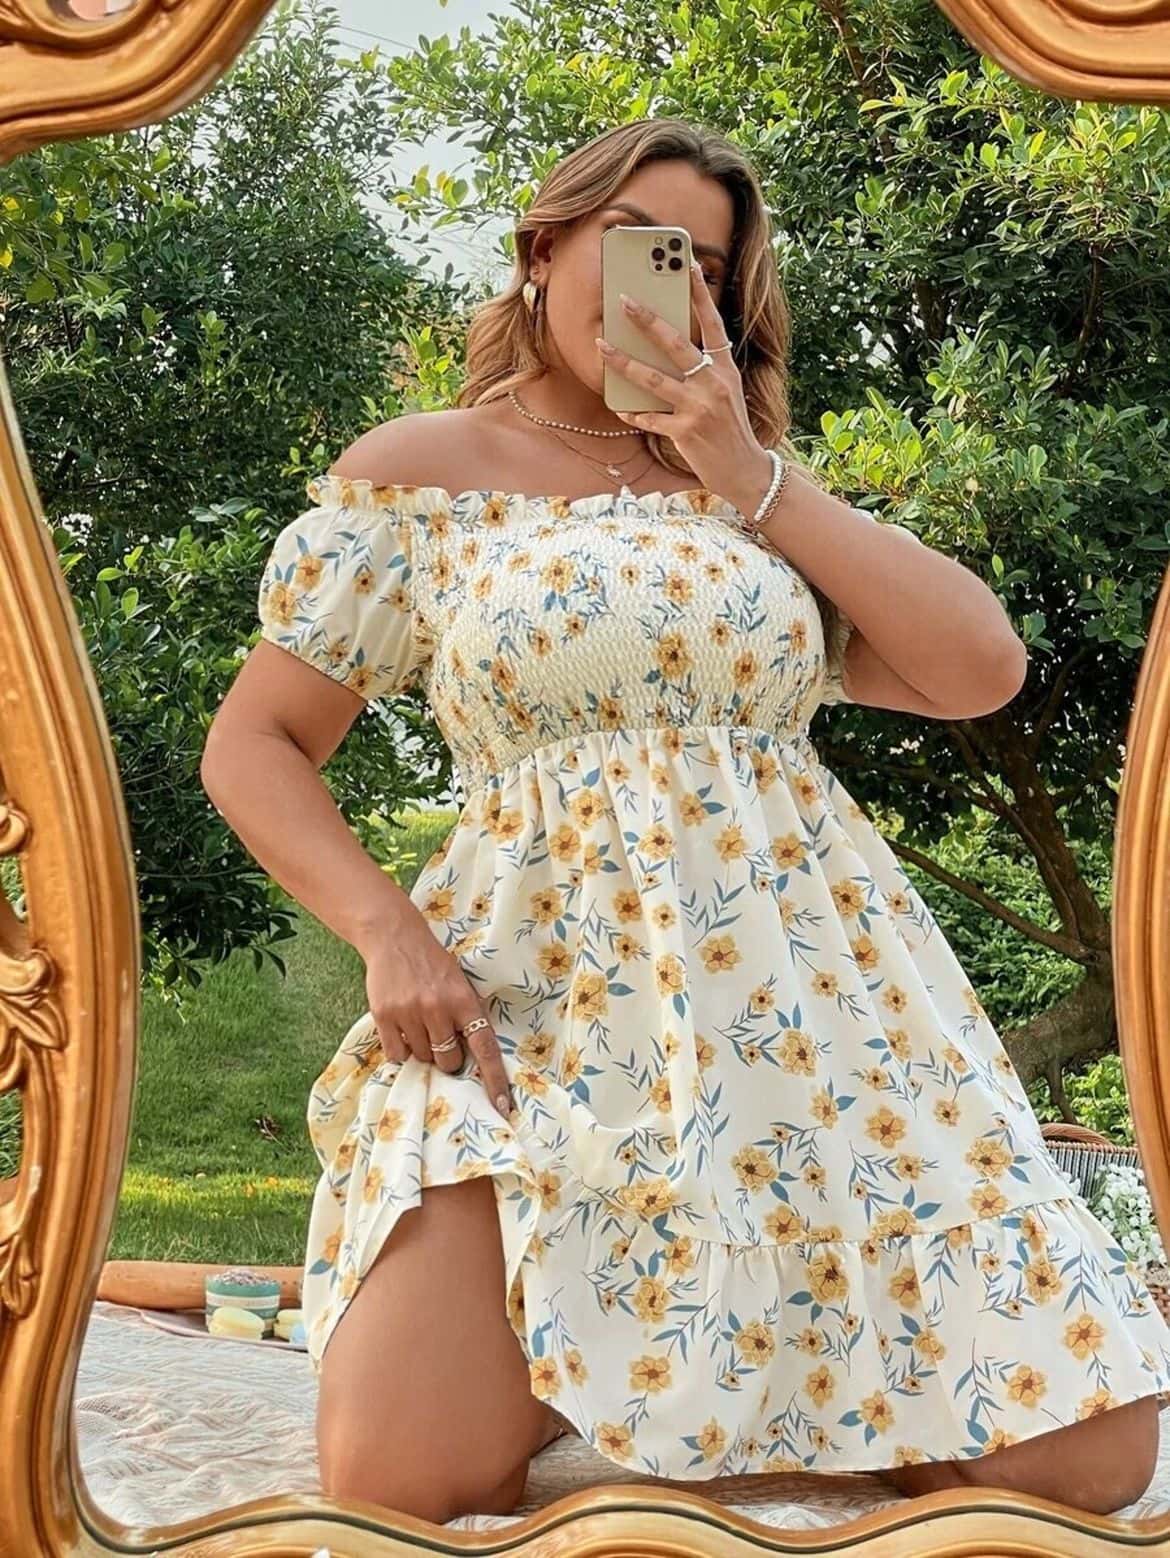 Young Beautiful Busty Curvy Plus Size Model With Big Breast In